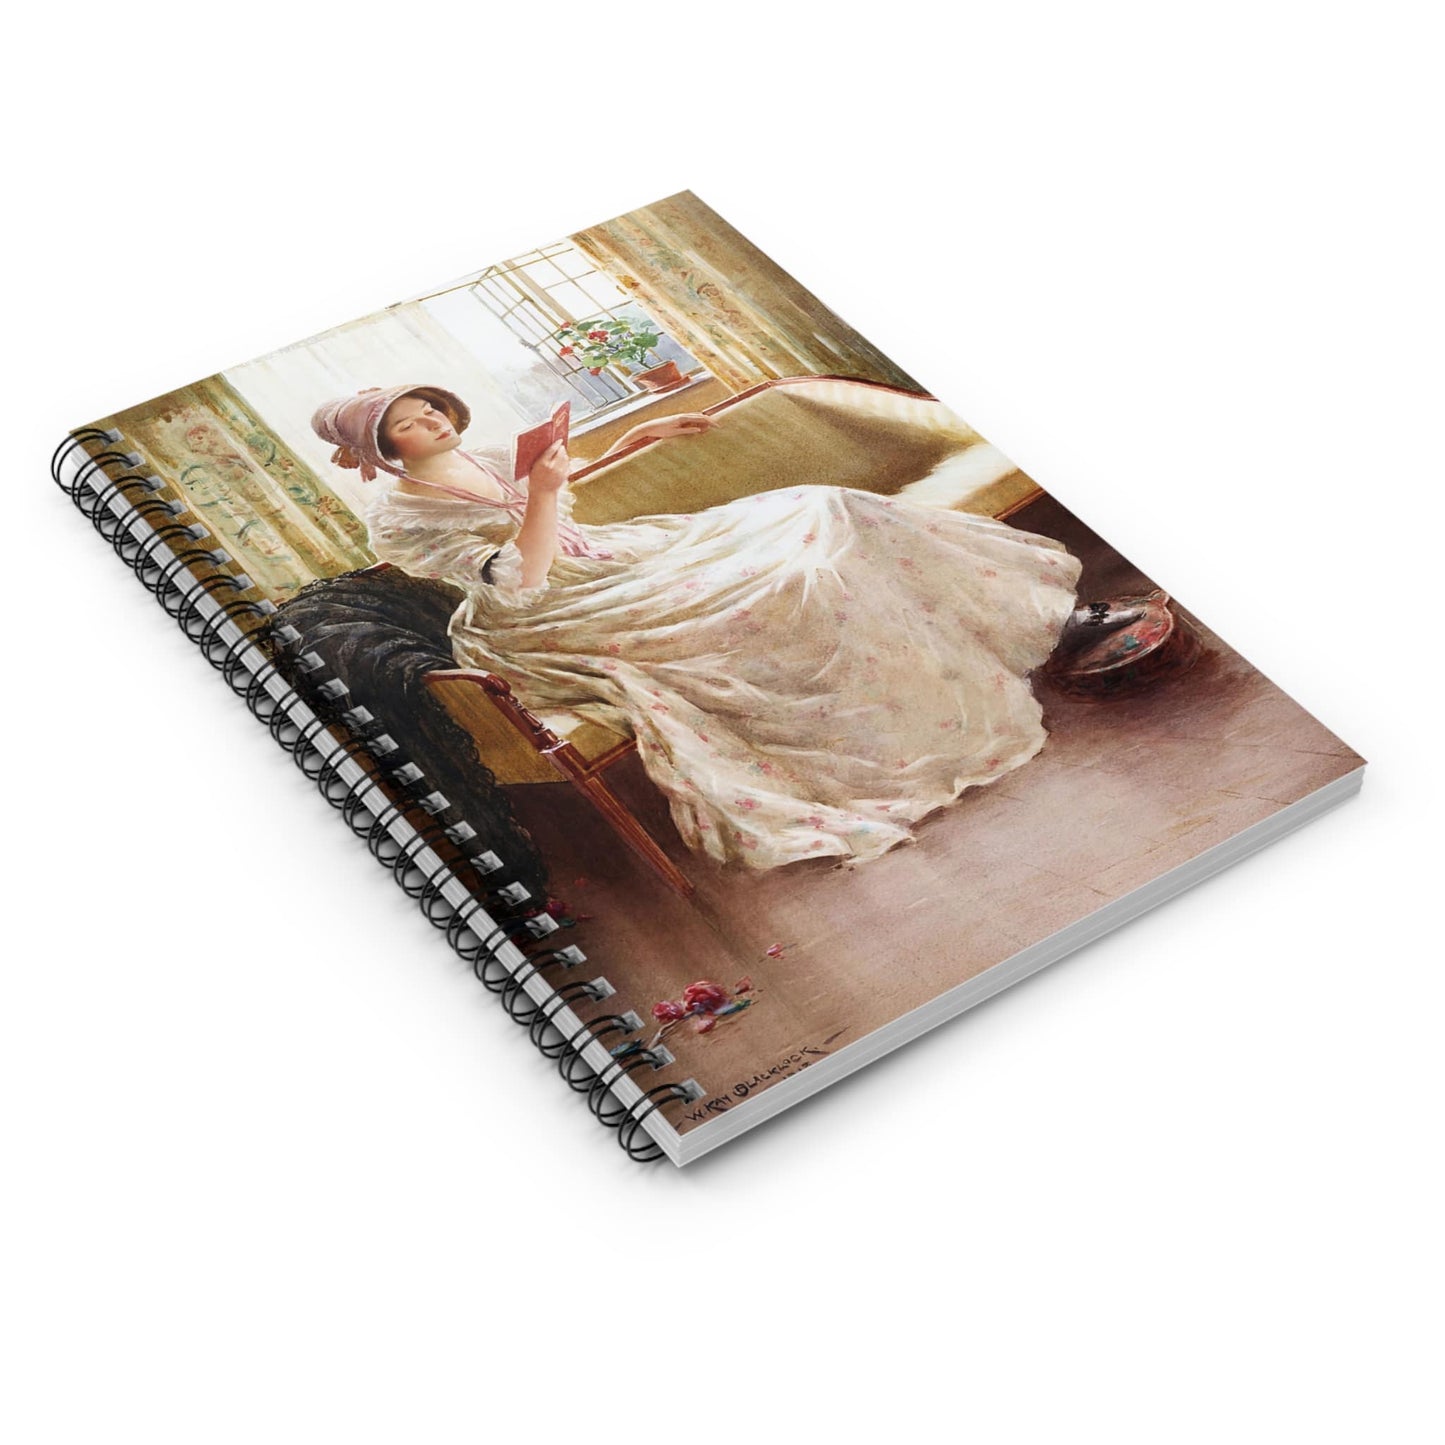 Cottagecore Spiral Notebook Laying Flat on White Surface